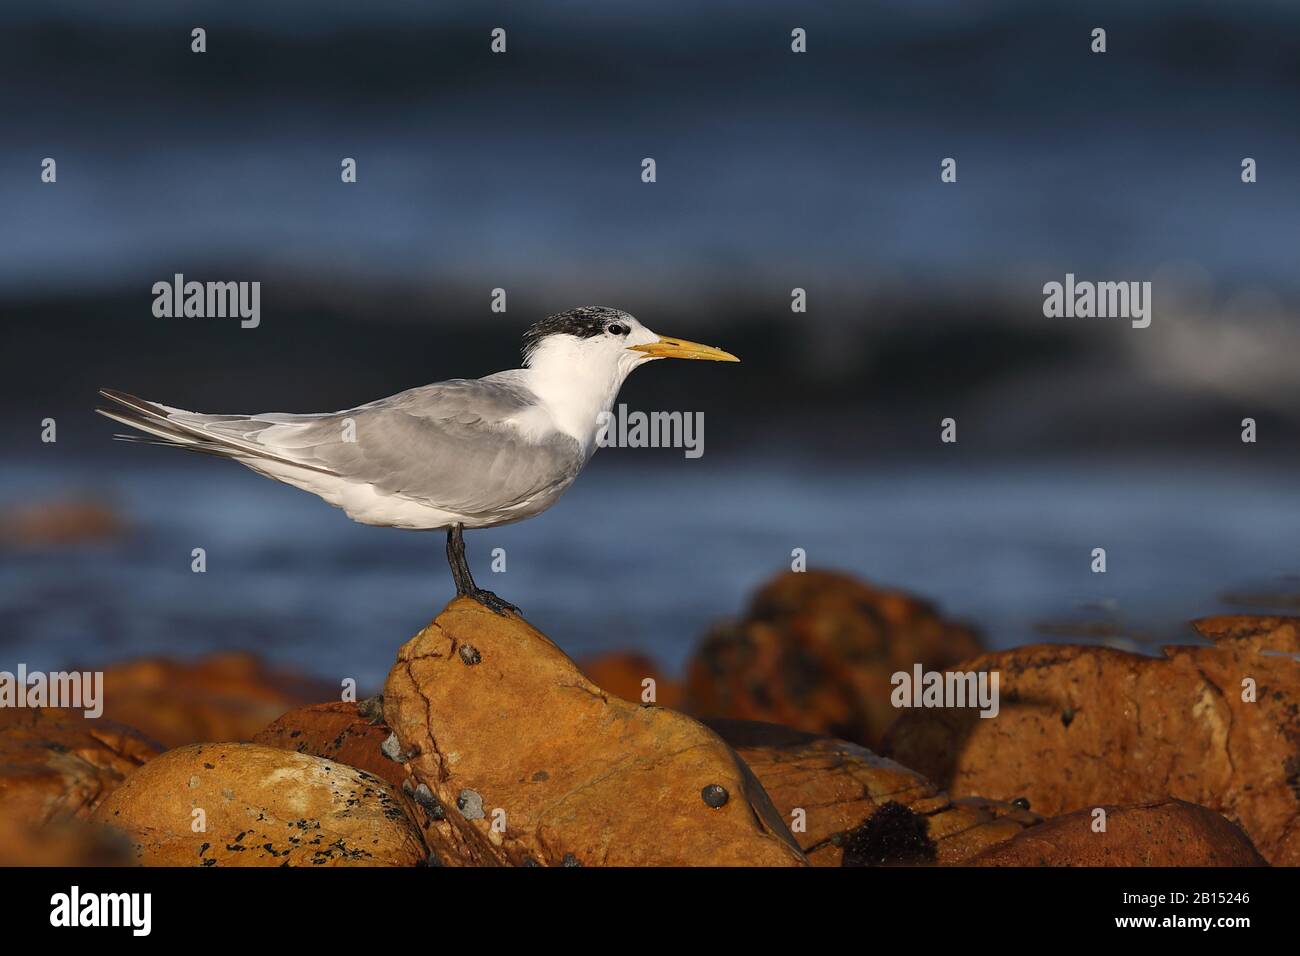 greater crested tern (Thalasseus bergii, Sterna bergii), on a stone on the beach, side view, South Africa, Cape Recife Nature Reserve Stock Photo